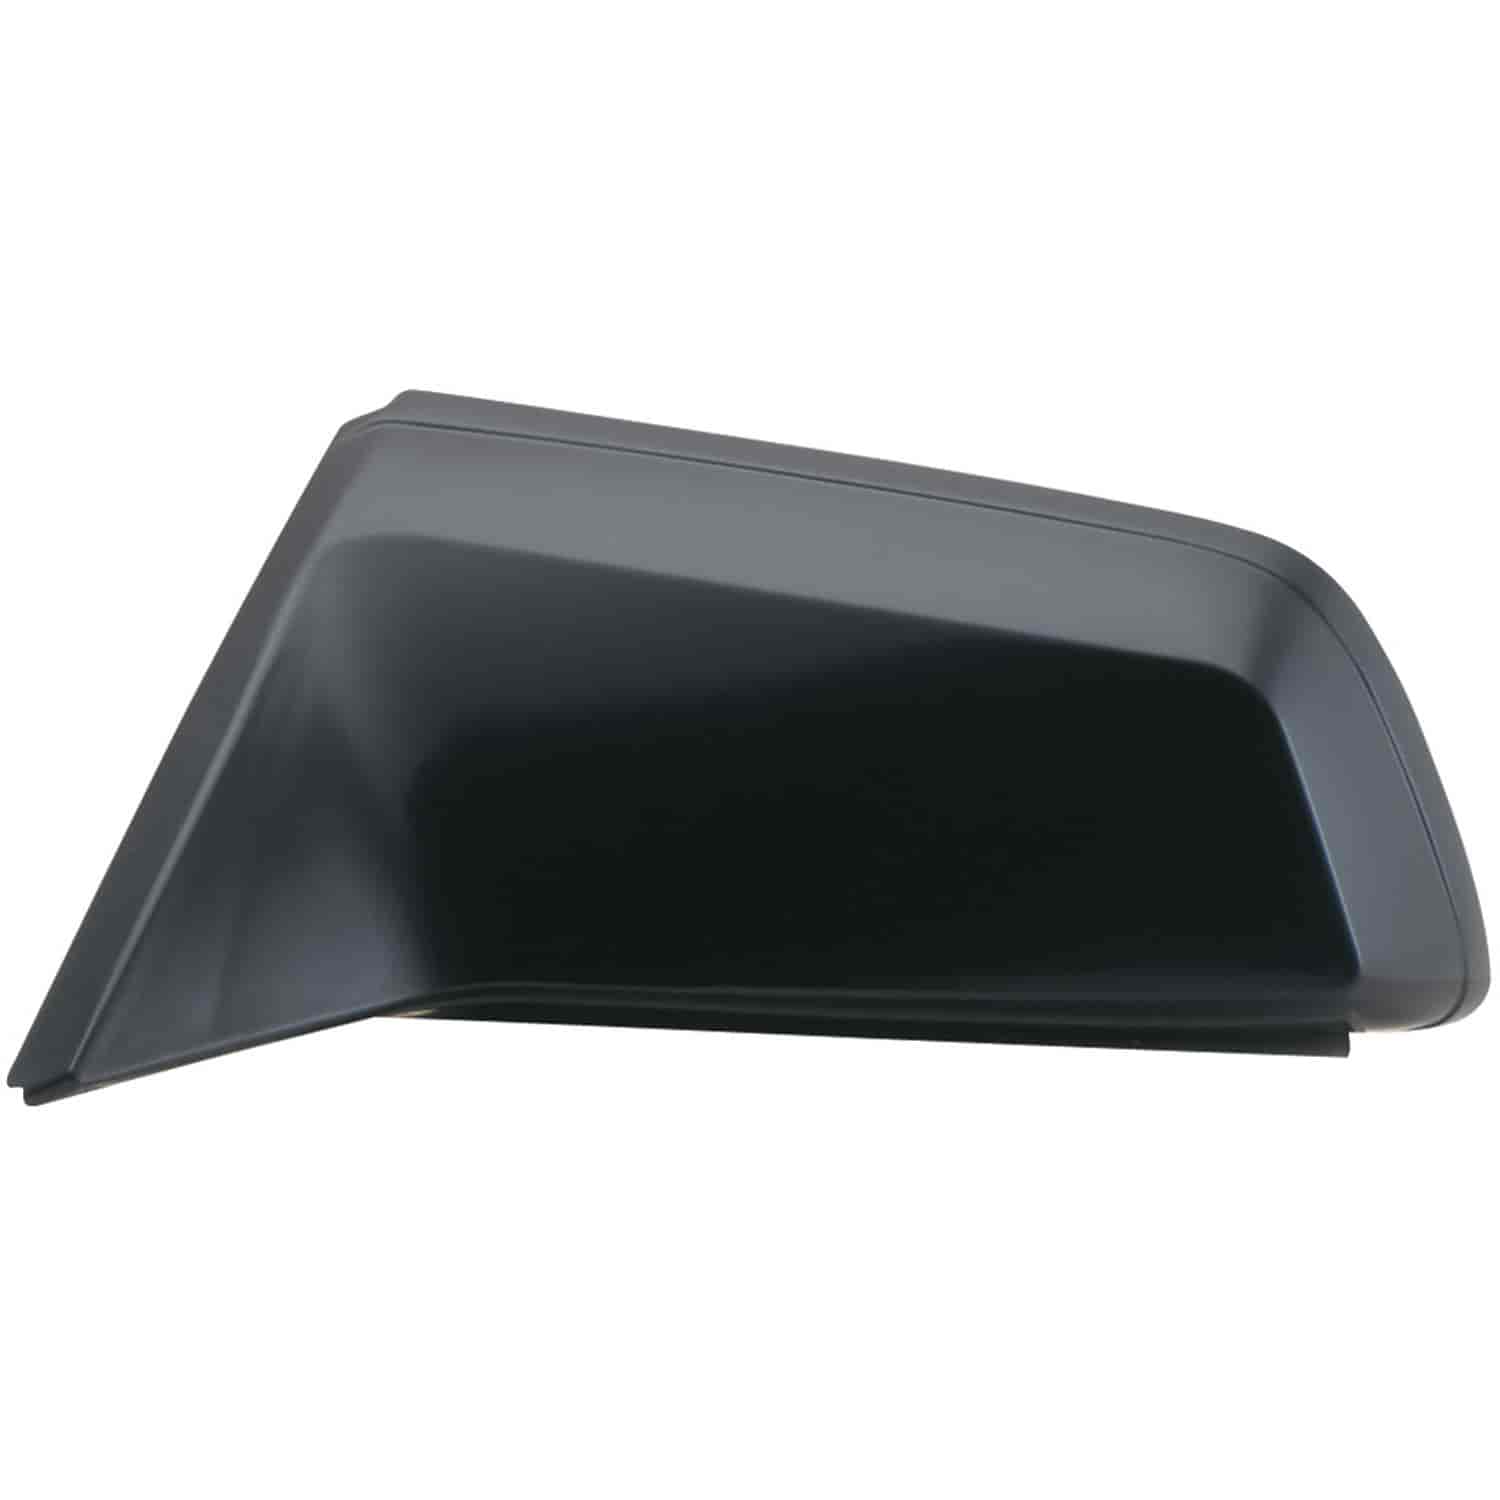 OEM Style Replacement mirror for 82-96 Buick Century/ Olds. Cutlass Ciera 82-90 Chevy Celebrity Spor